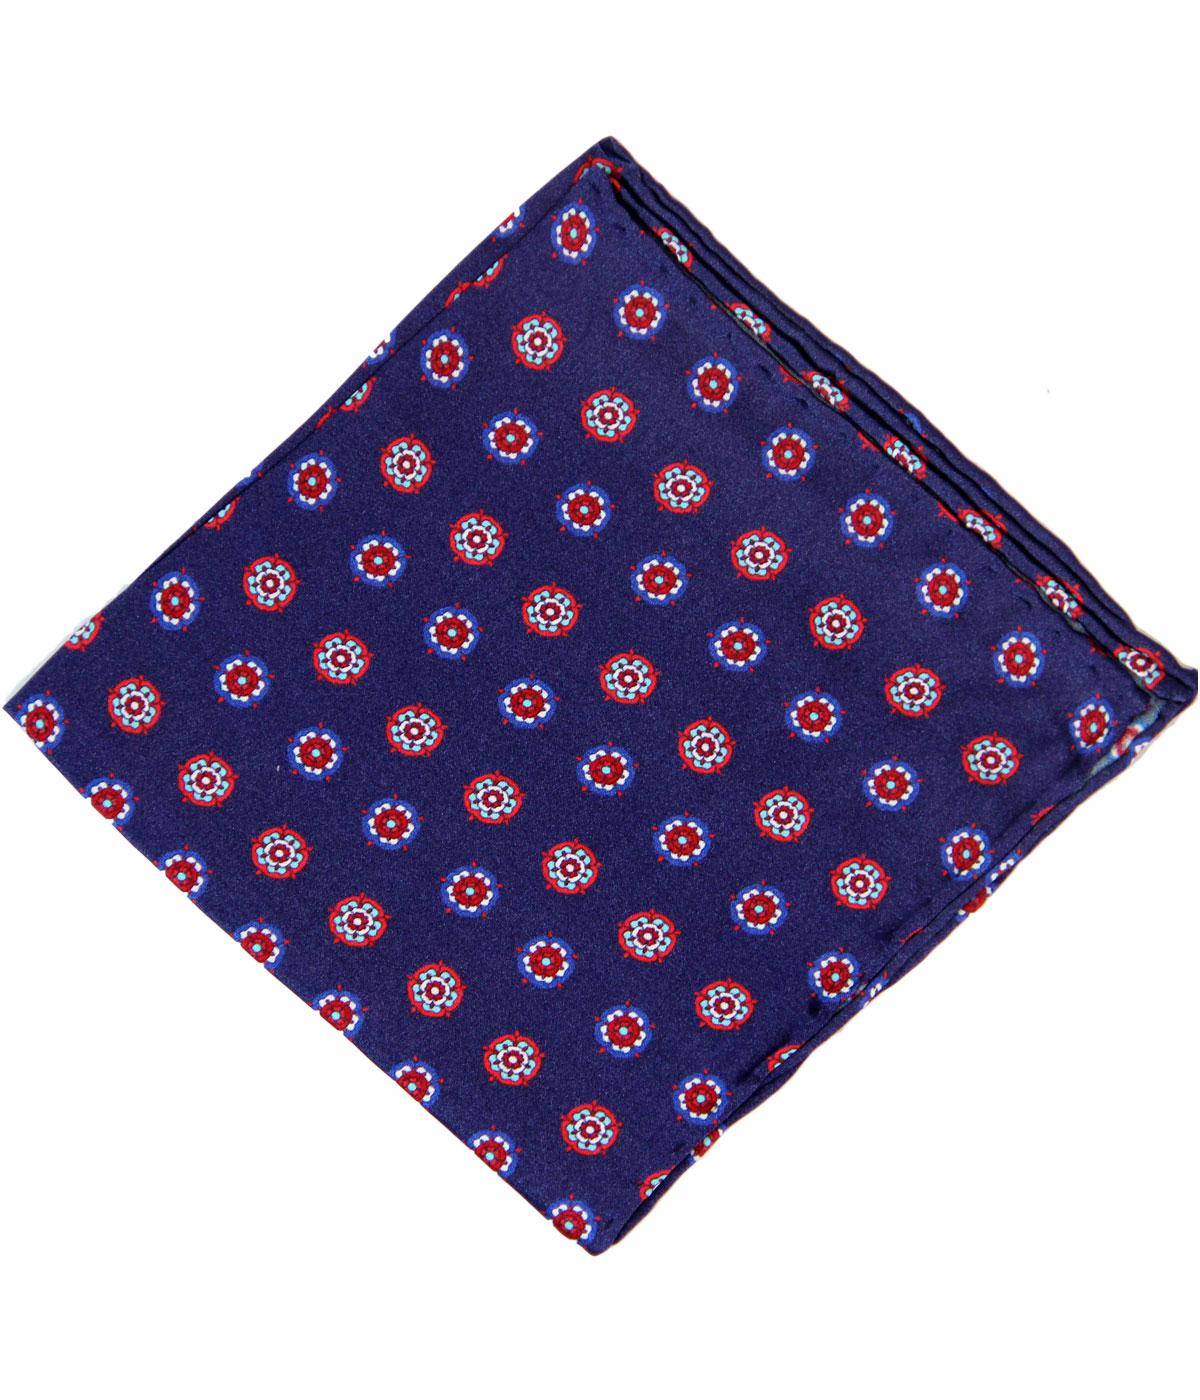 TOOTAL Retro 1960s Mod Roses Print Silk Pocket Square in Navy